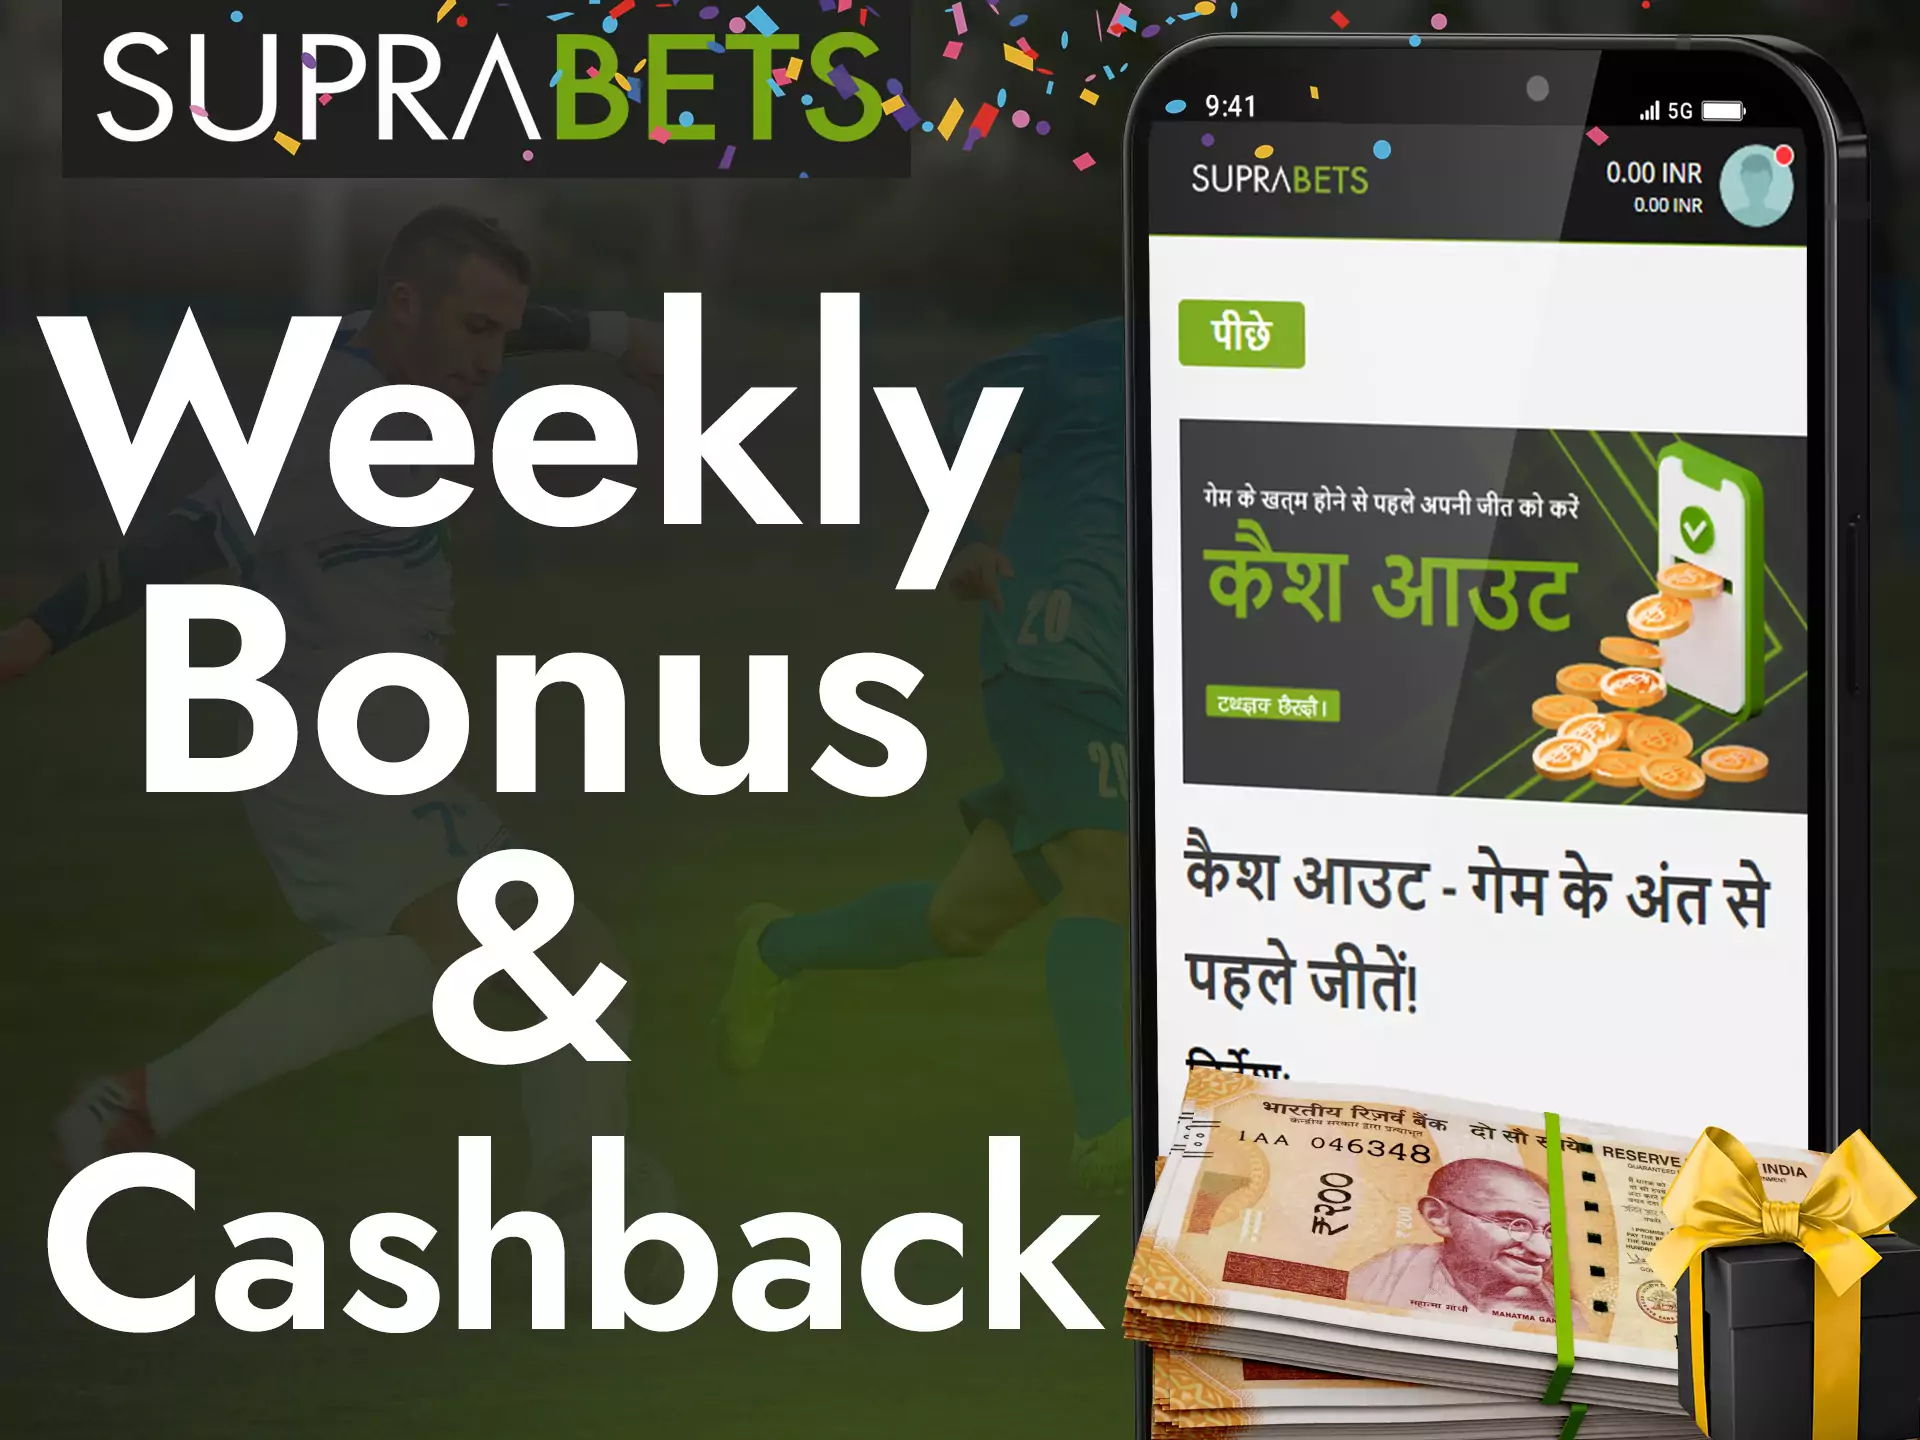 Try the weekly Suprabets bonus and cashback, don't miss the chance.